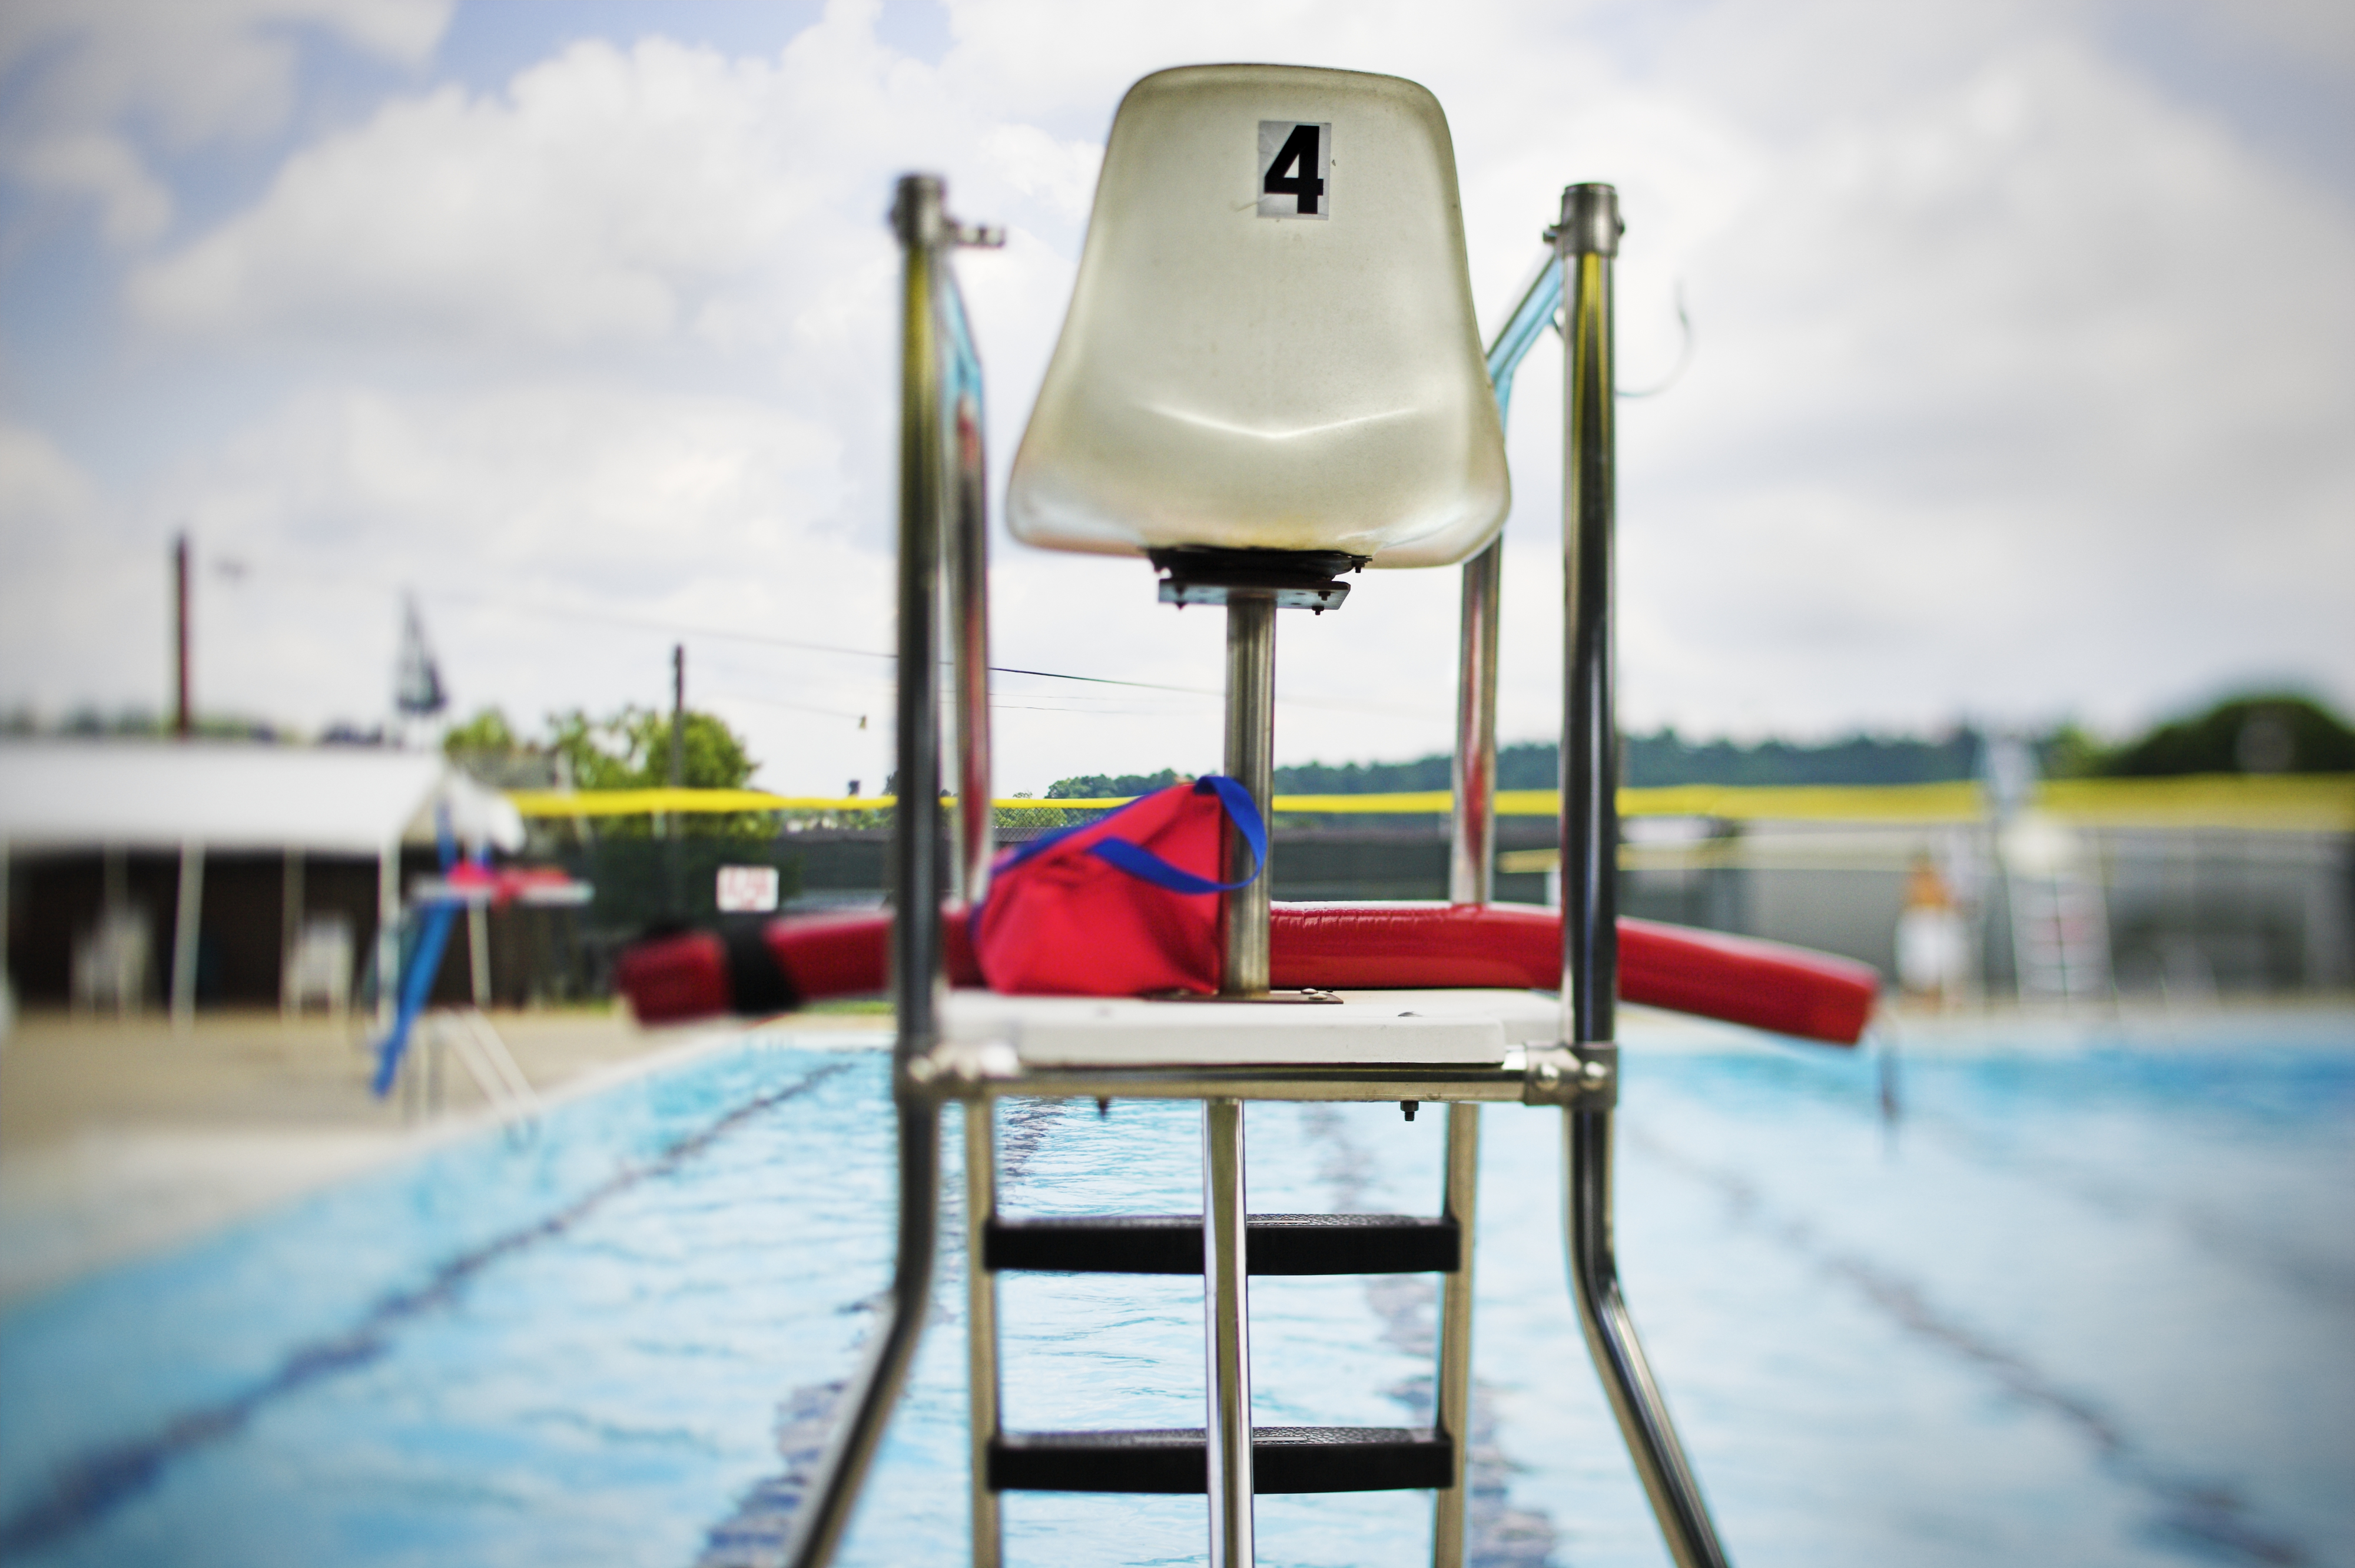 A lifeguard&#x27;s chair at a pool